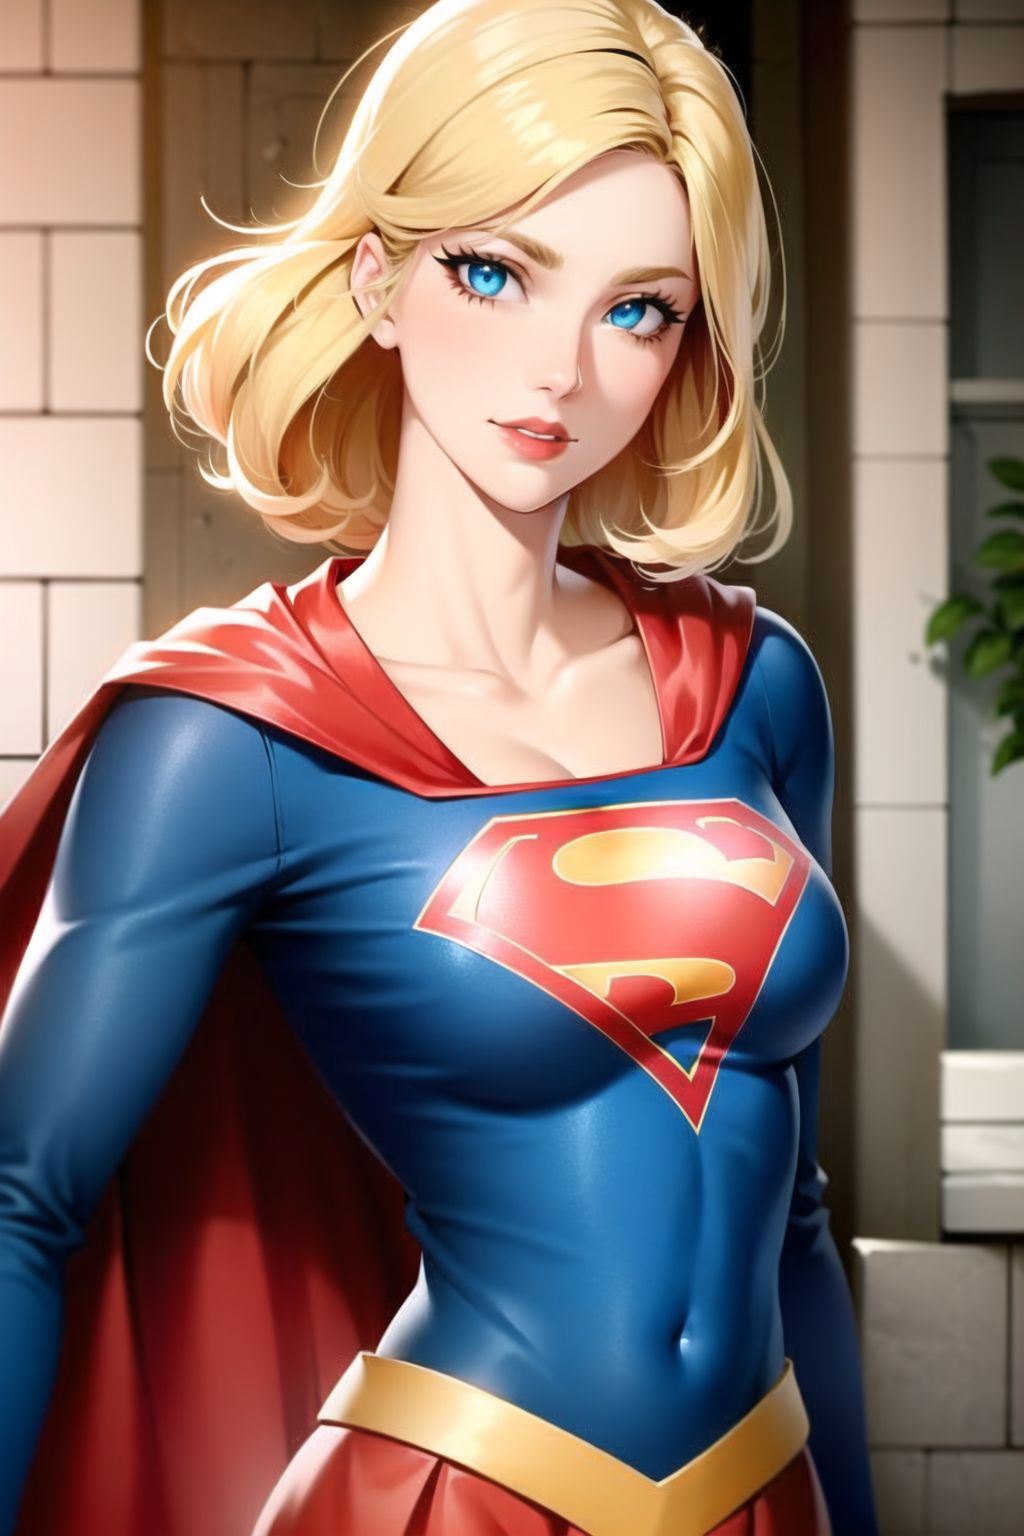 Supergirl (DC Comic) image by Goofy_Ai